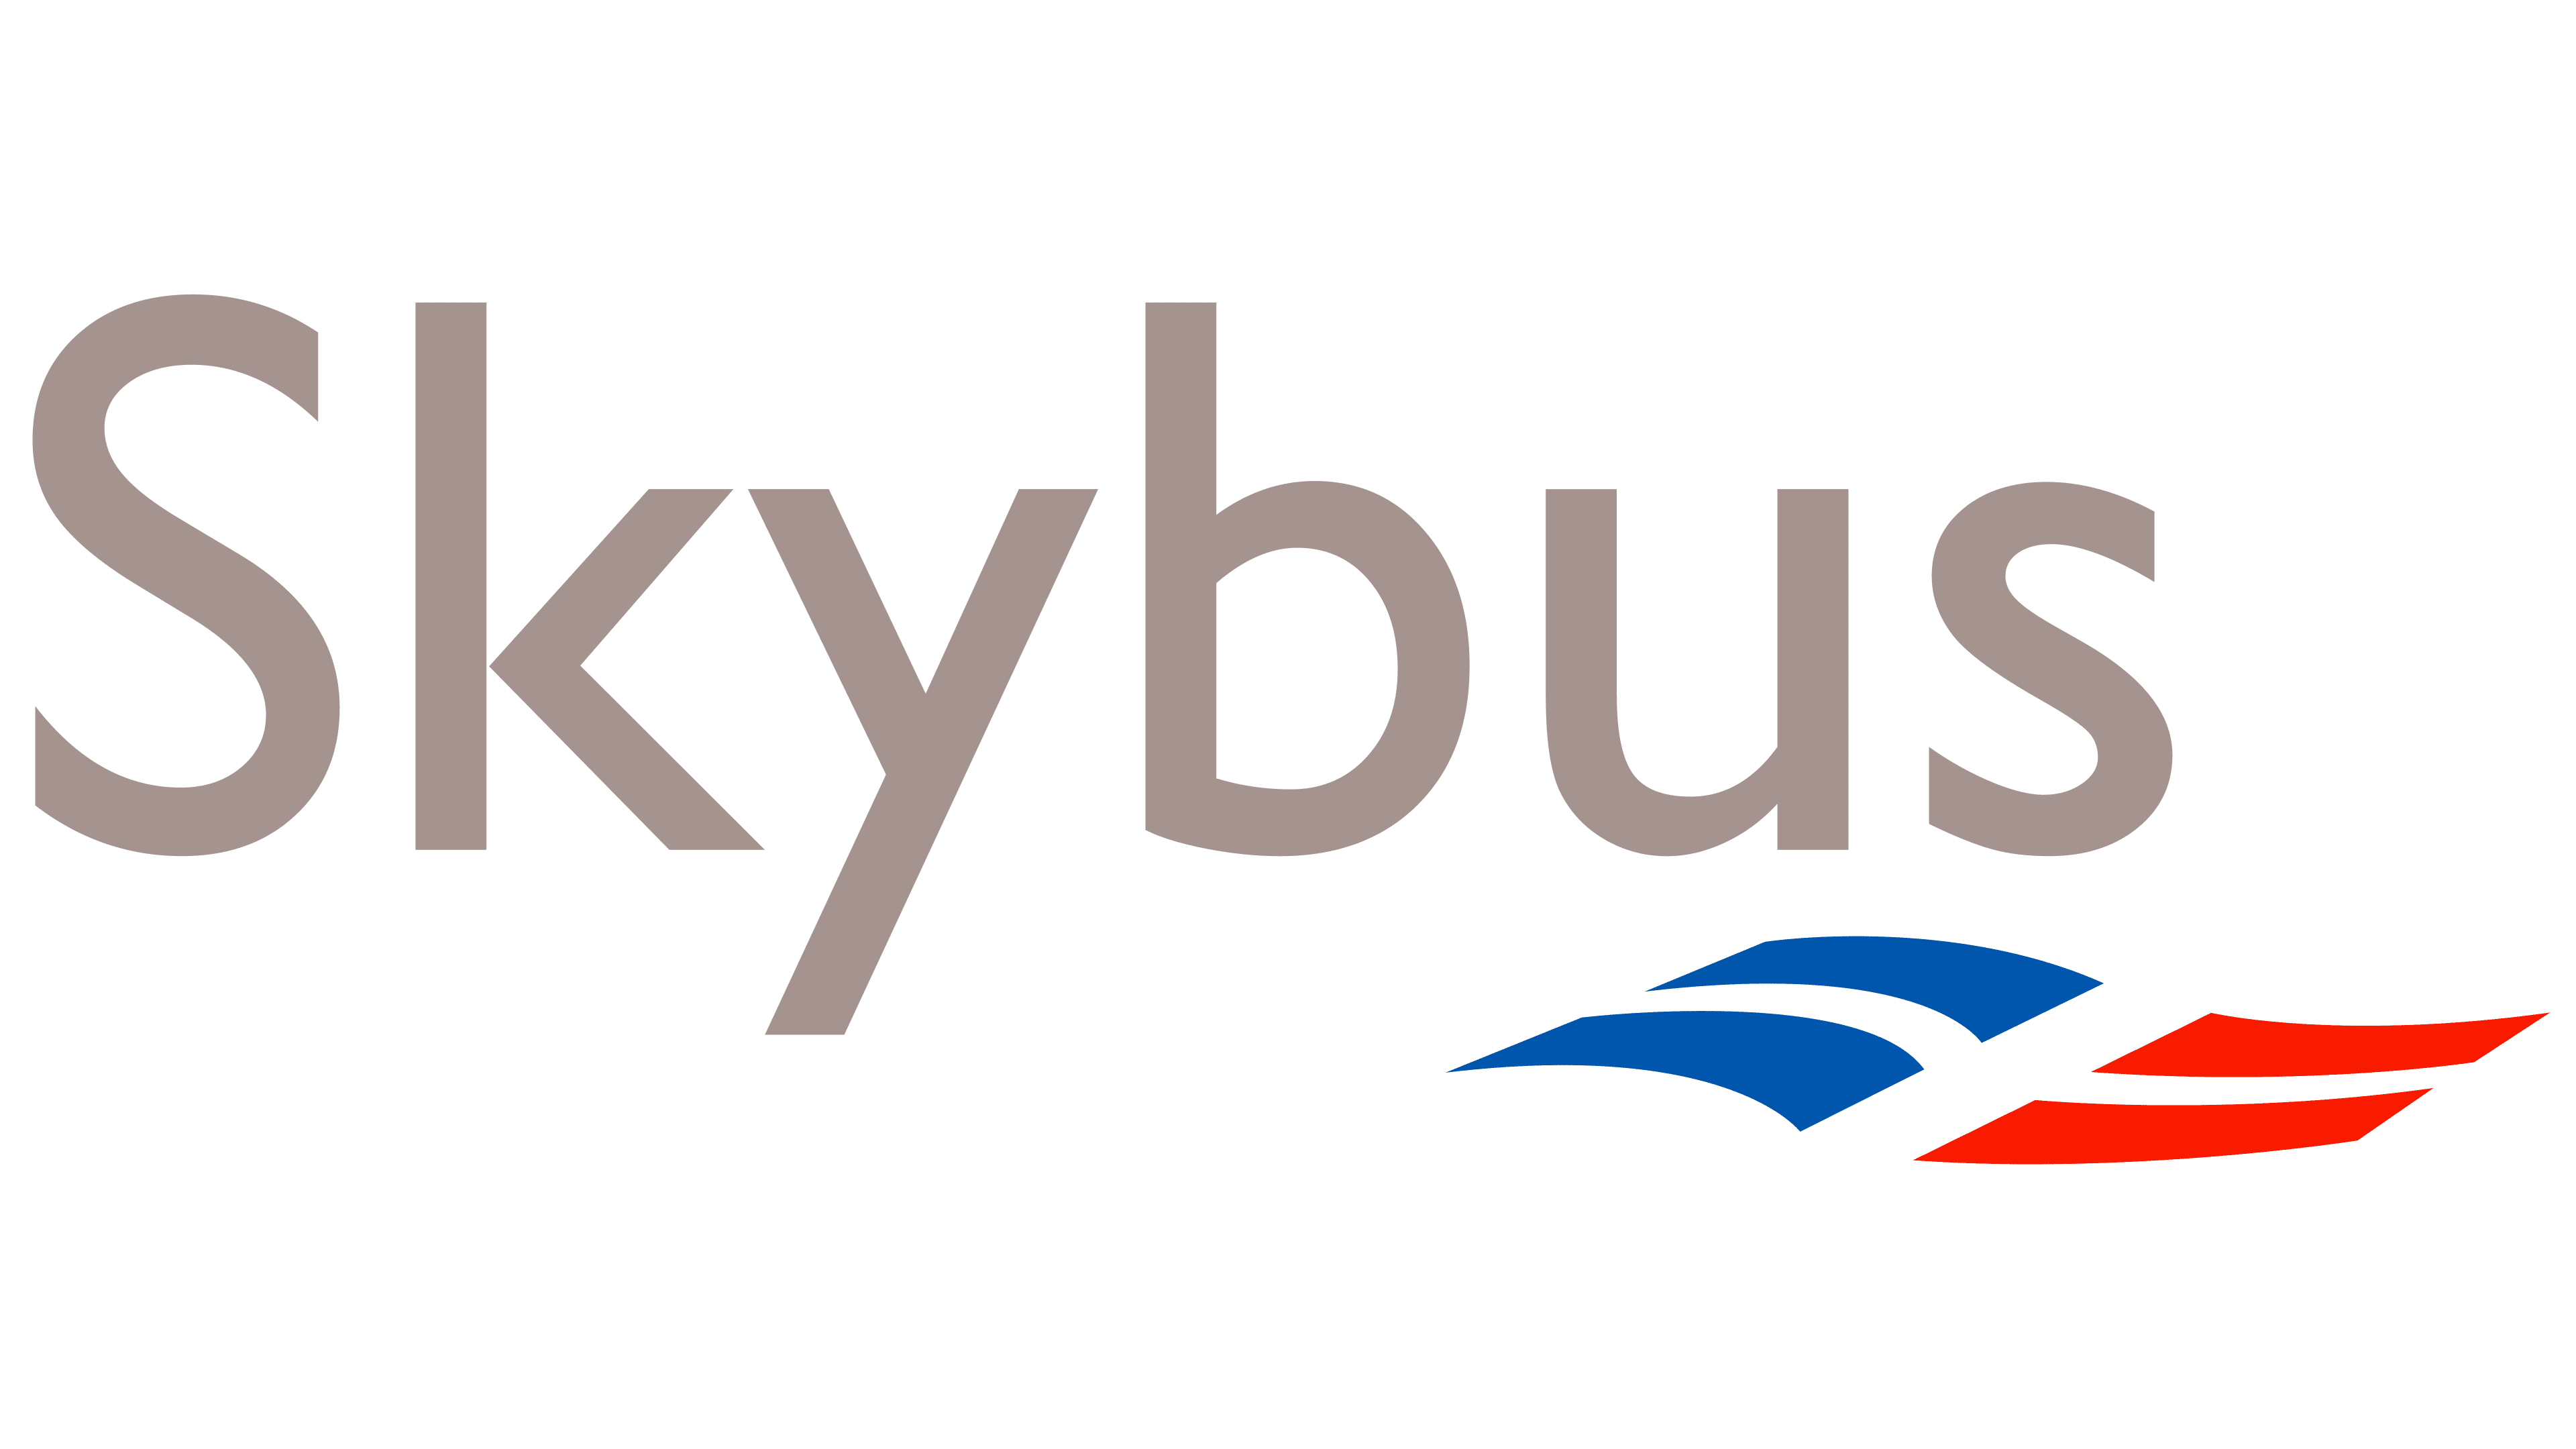 Isles of Scilly Skybus Logo, symbol, meaning, history, PNG, brand